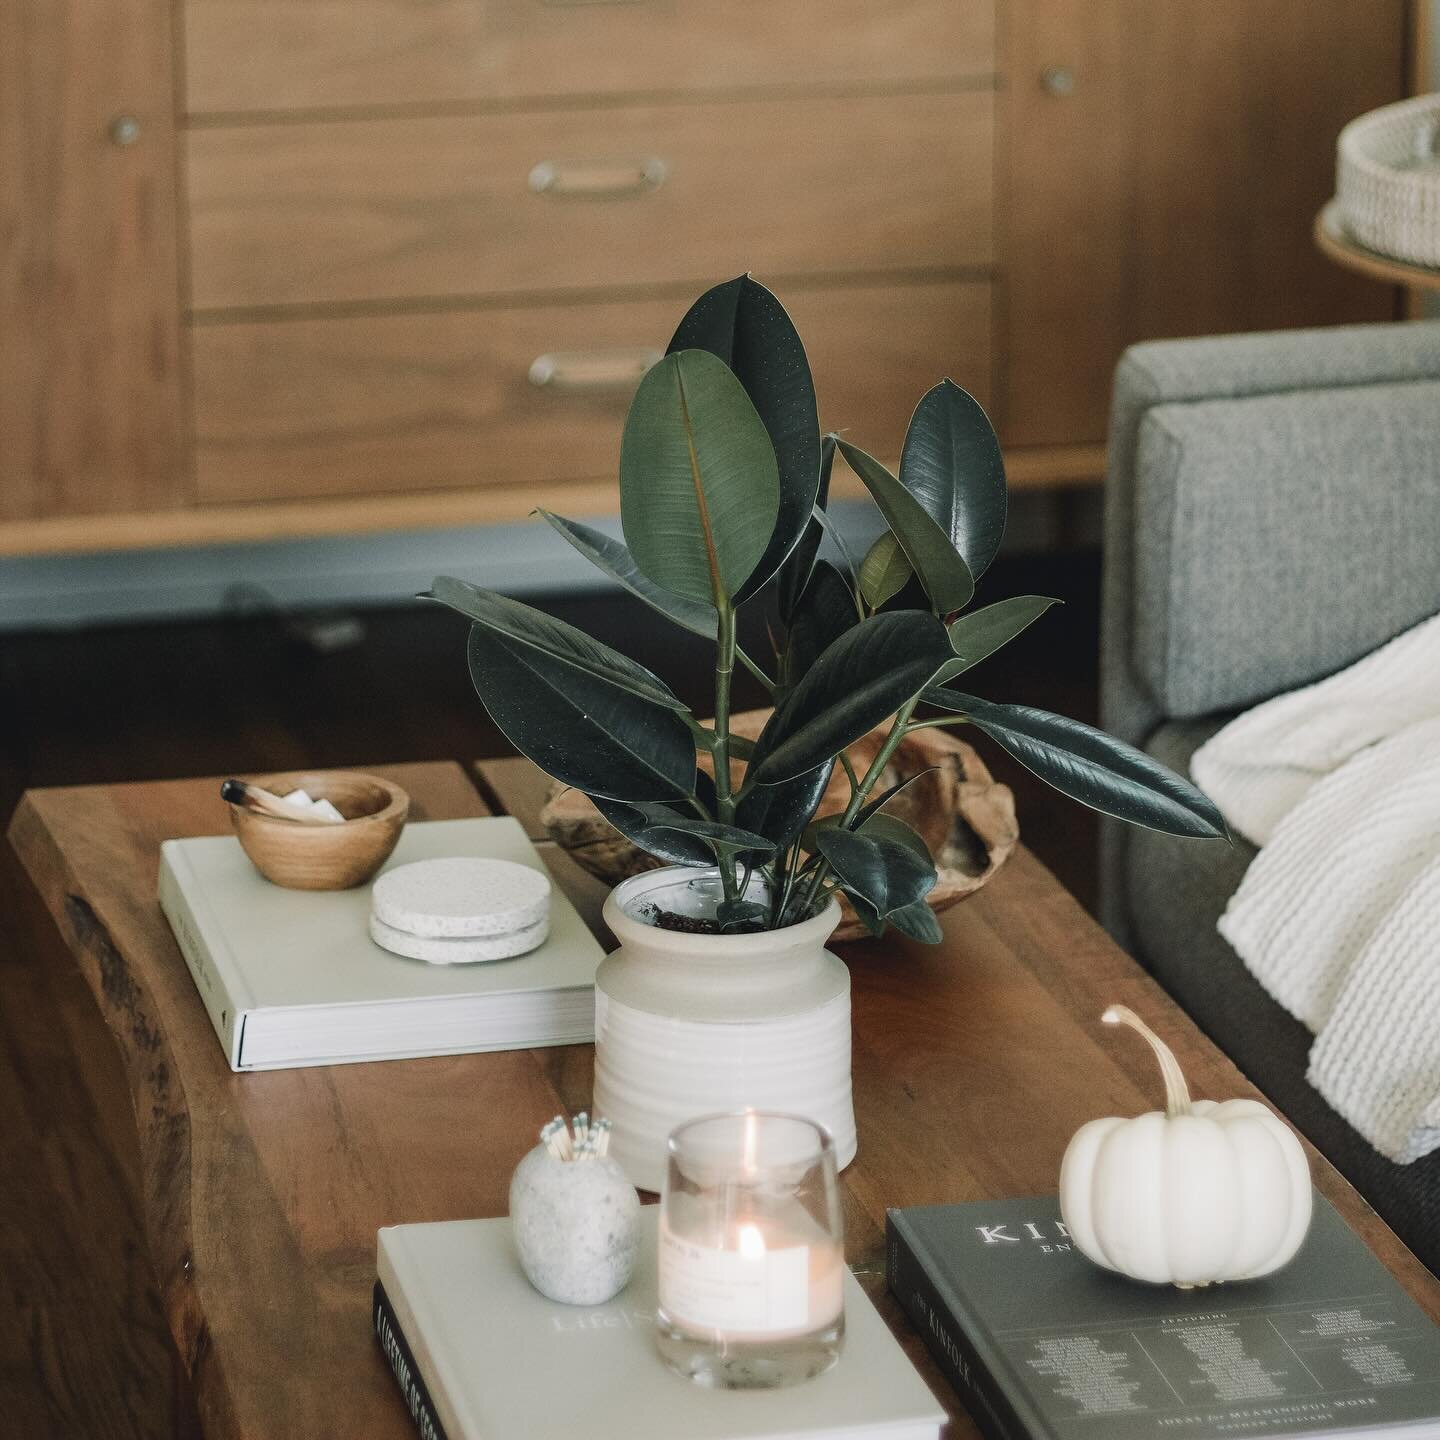 3 tips to styling your coffee table 

Think About Heights
If all the items are a similar size or height, you may find the arrangement looks flat and uninteresting! 

Make sure you alternate the heights of the objects, but functionality still is key. 